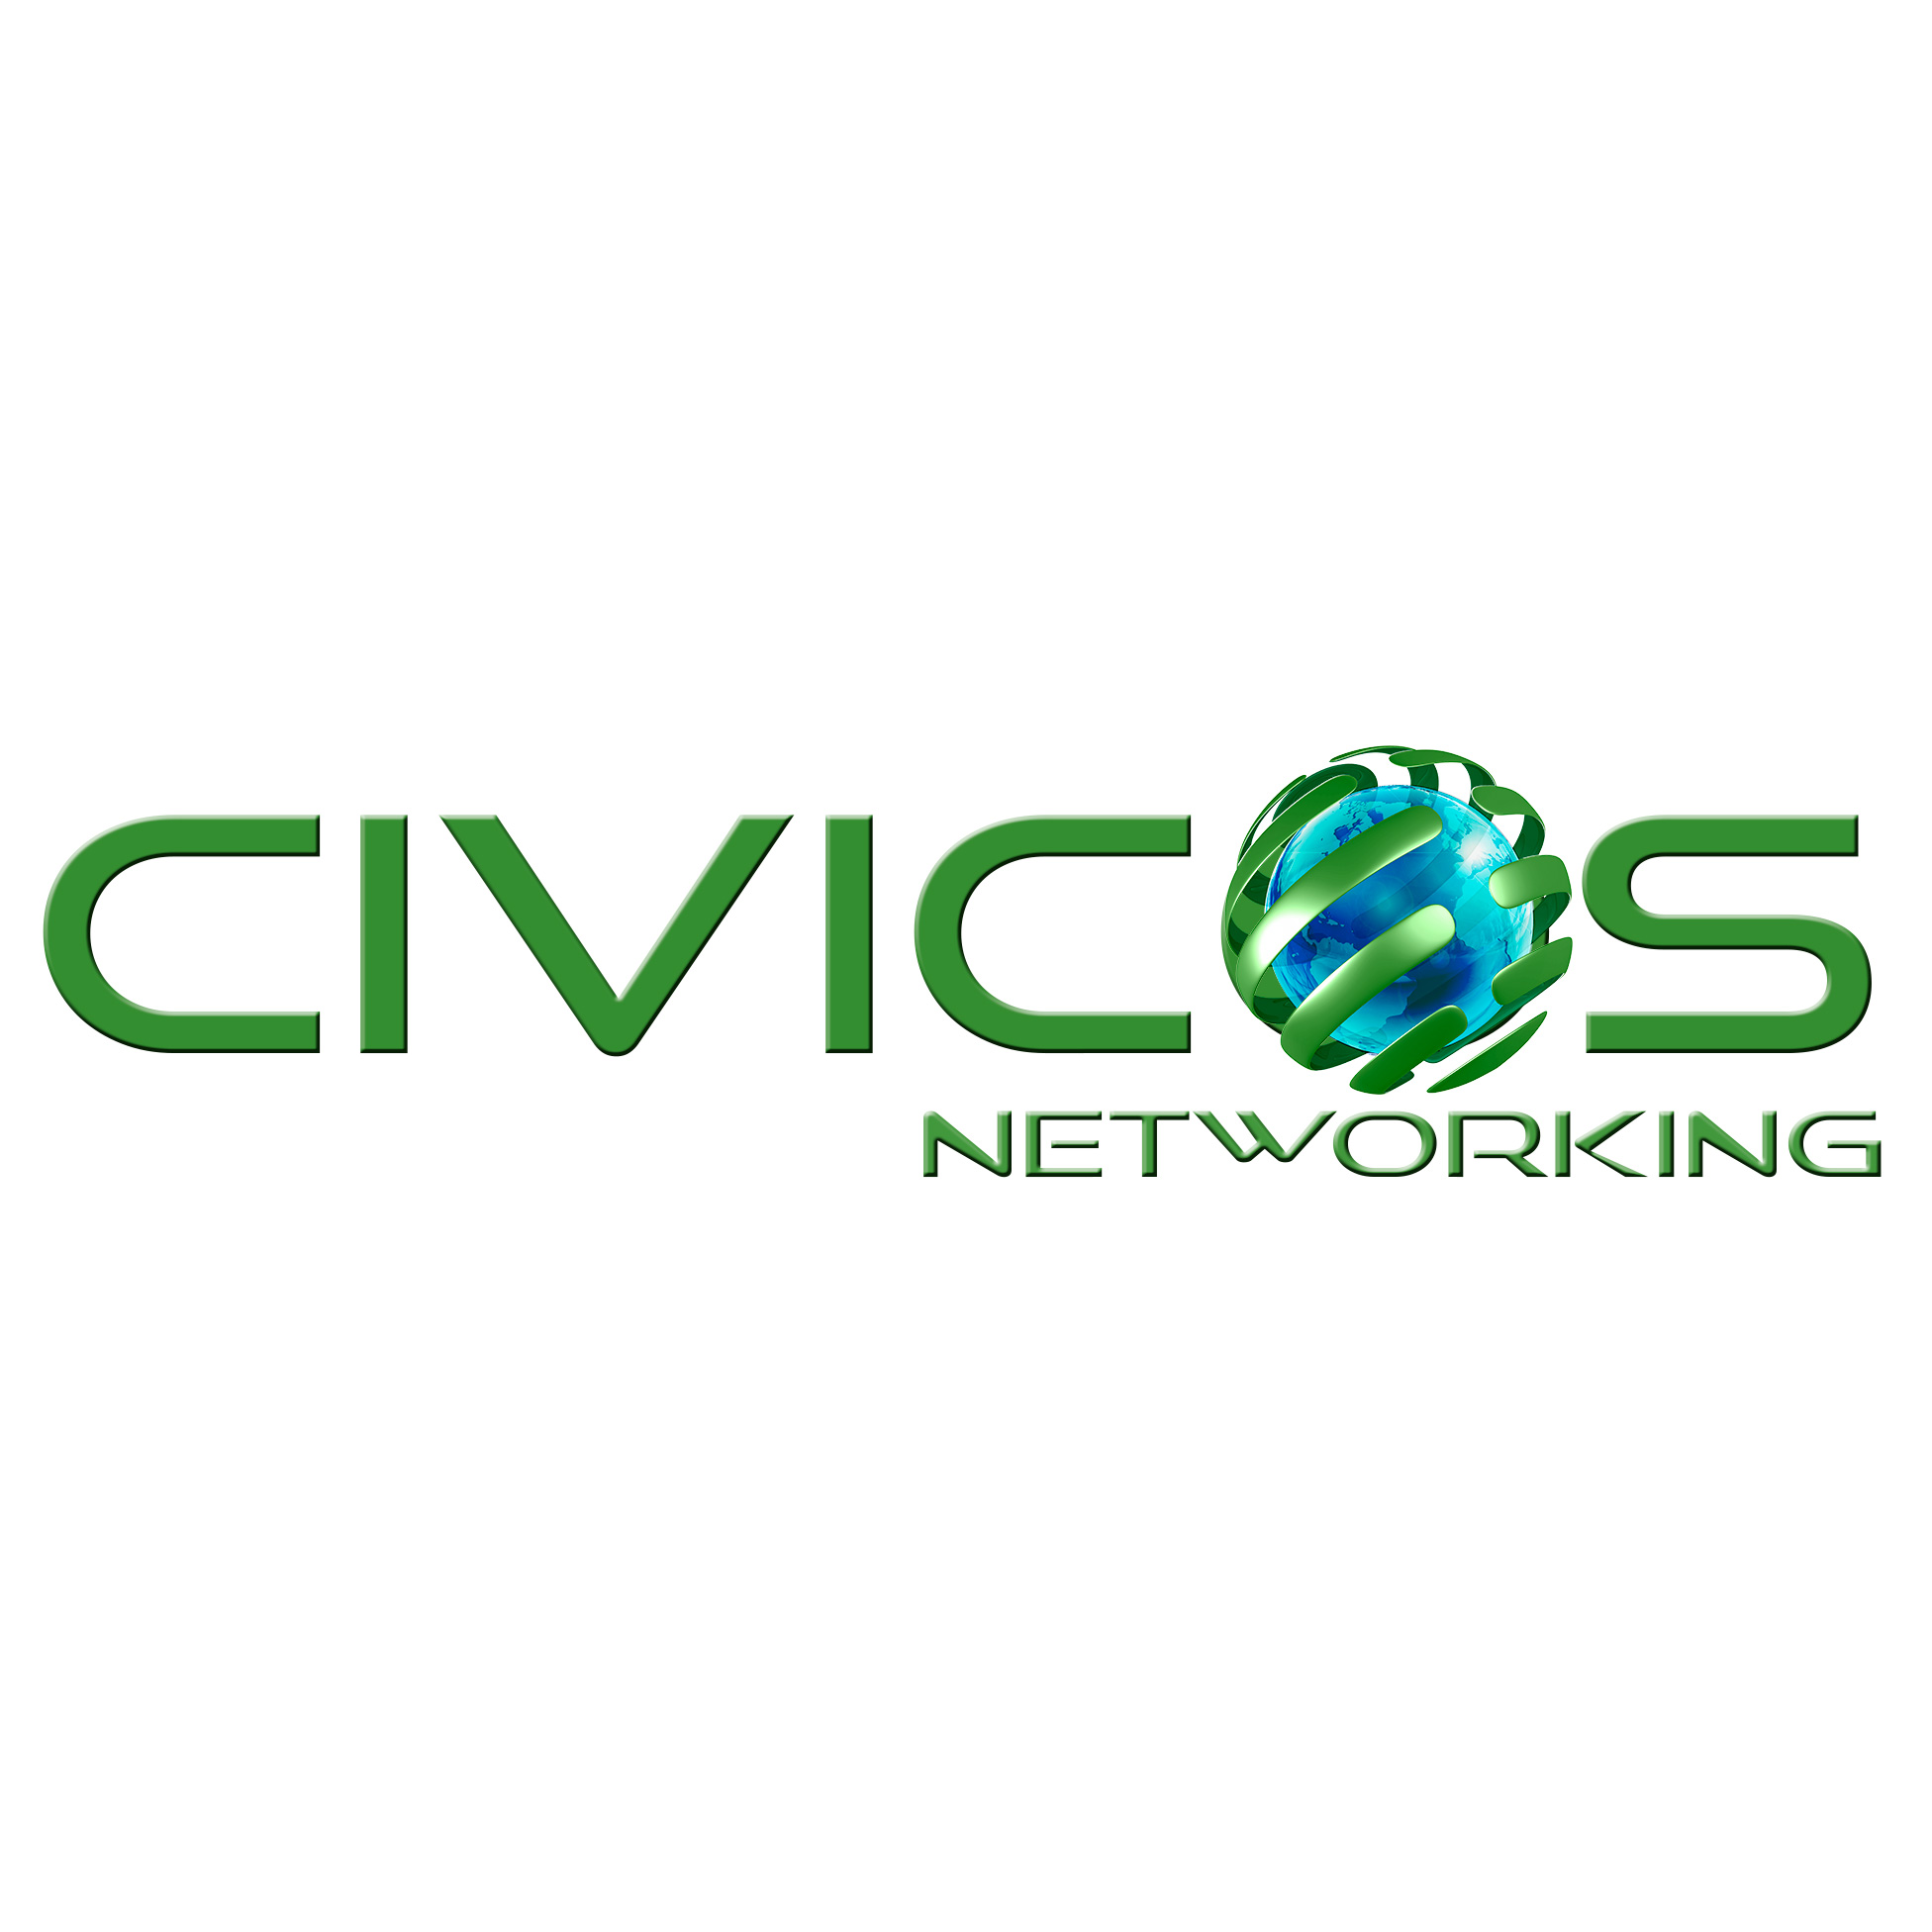 Civicos Networking